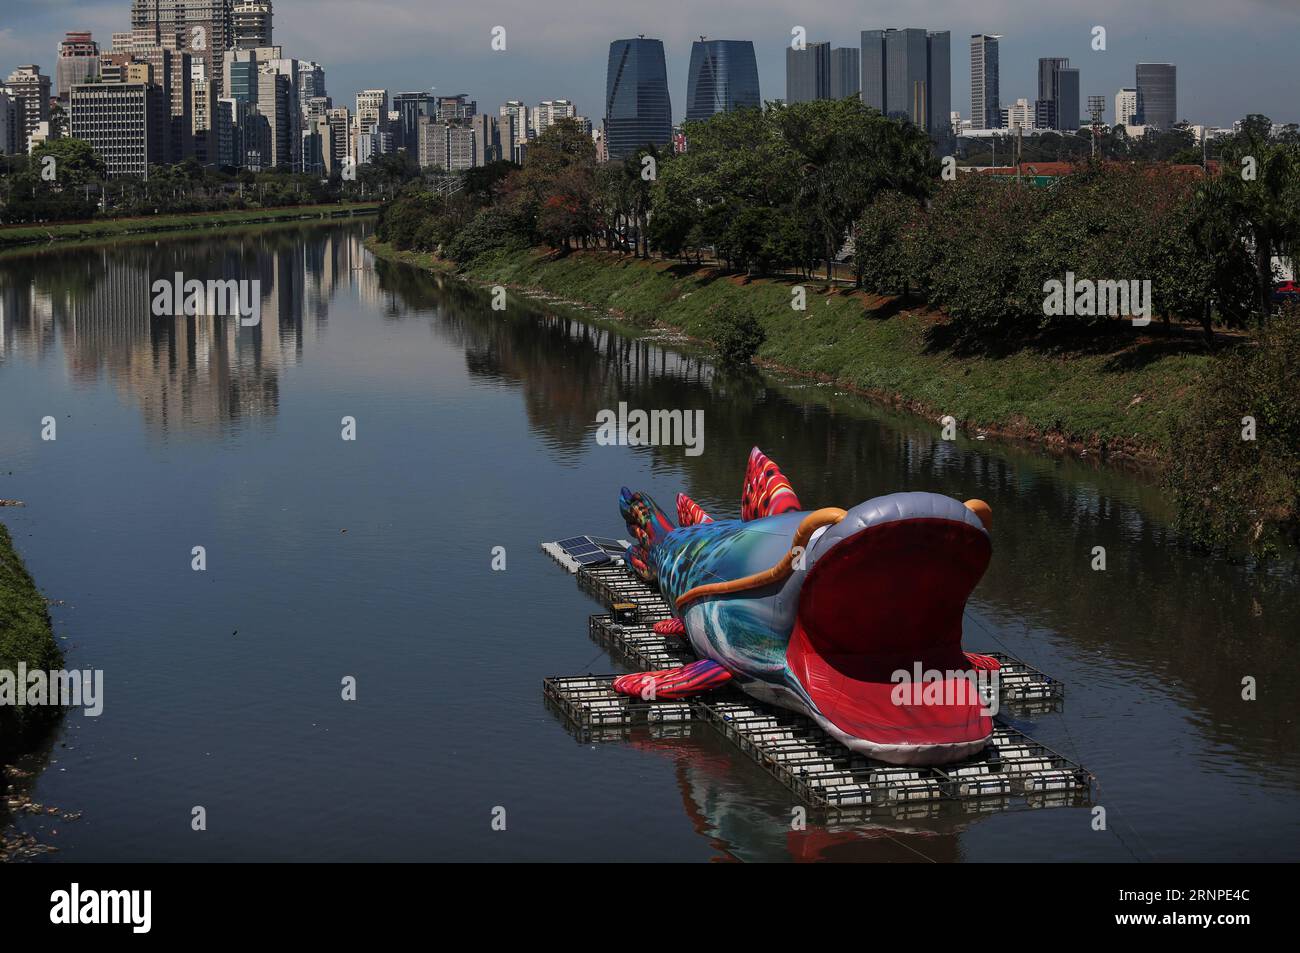 (170825) -- SAO PAULO, Aug. 25, 2017 -- A representation of a giant fish, 30 meters long and 7 meters high, floats through the Pinheiros river, in Sao Paulo, Brazil, on Aug. 24, 2017. The floating urban intervention called Pintado is a work of the Brazilian plastic artist Eduardo Srur, and is part of an event called Virada Sustentavel , that takes place on Aug. 24 to 27 in Sao Paulo, with the objetive of taking to society the actions related with sustainable living. ) (da) (fnc) BRAZIL-SAO PAULO-ENVIRONMENT-EVENT RahelxPatrasso PUBLICATIONxNOTxINxCHN   Sao Paulo Aug 25 2017 a representation of Stock Photo